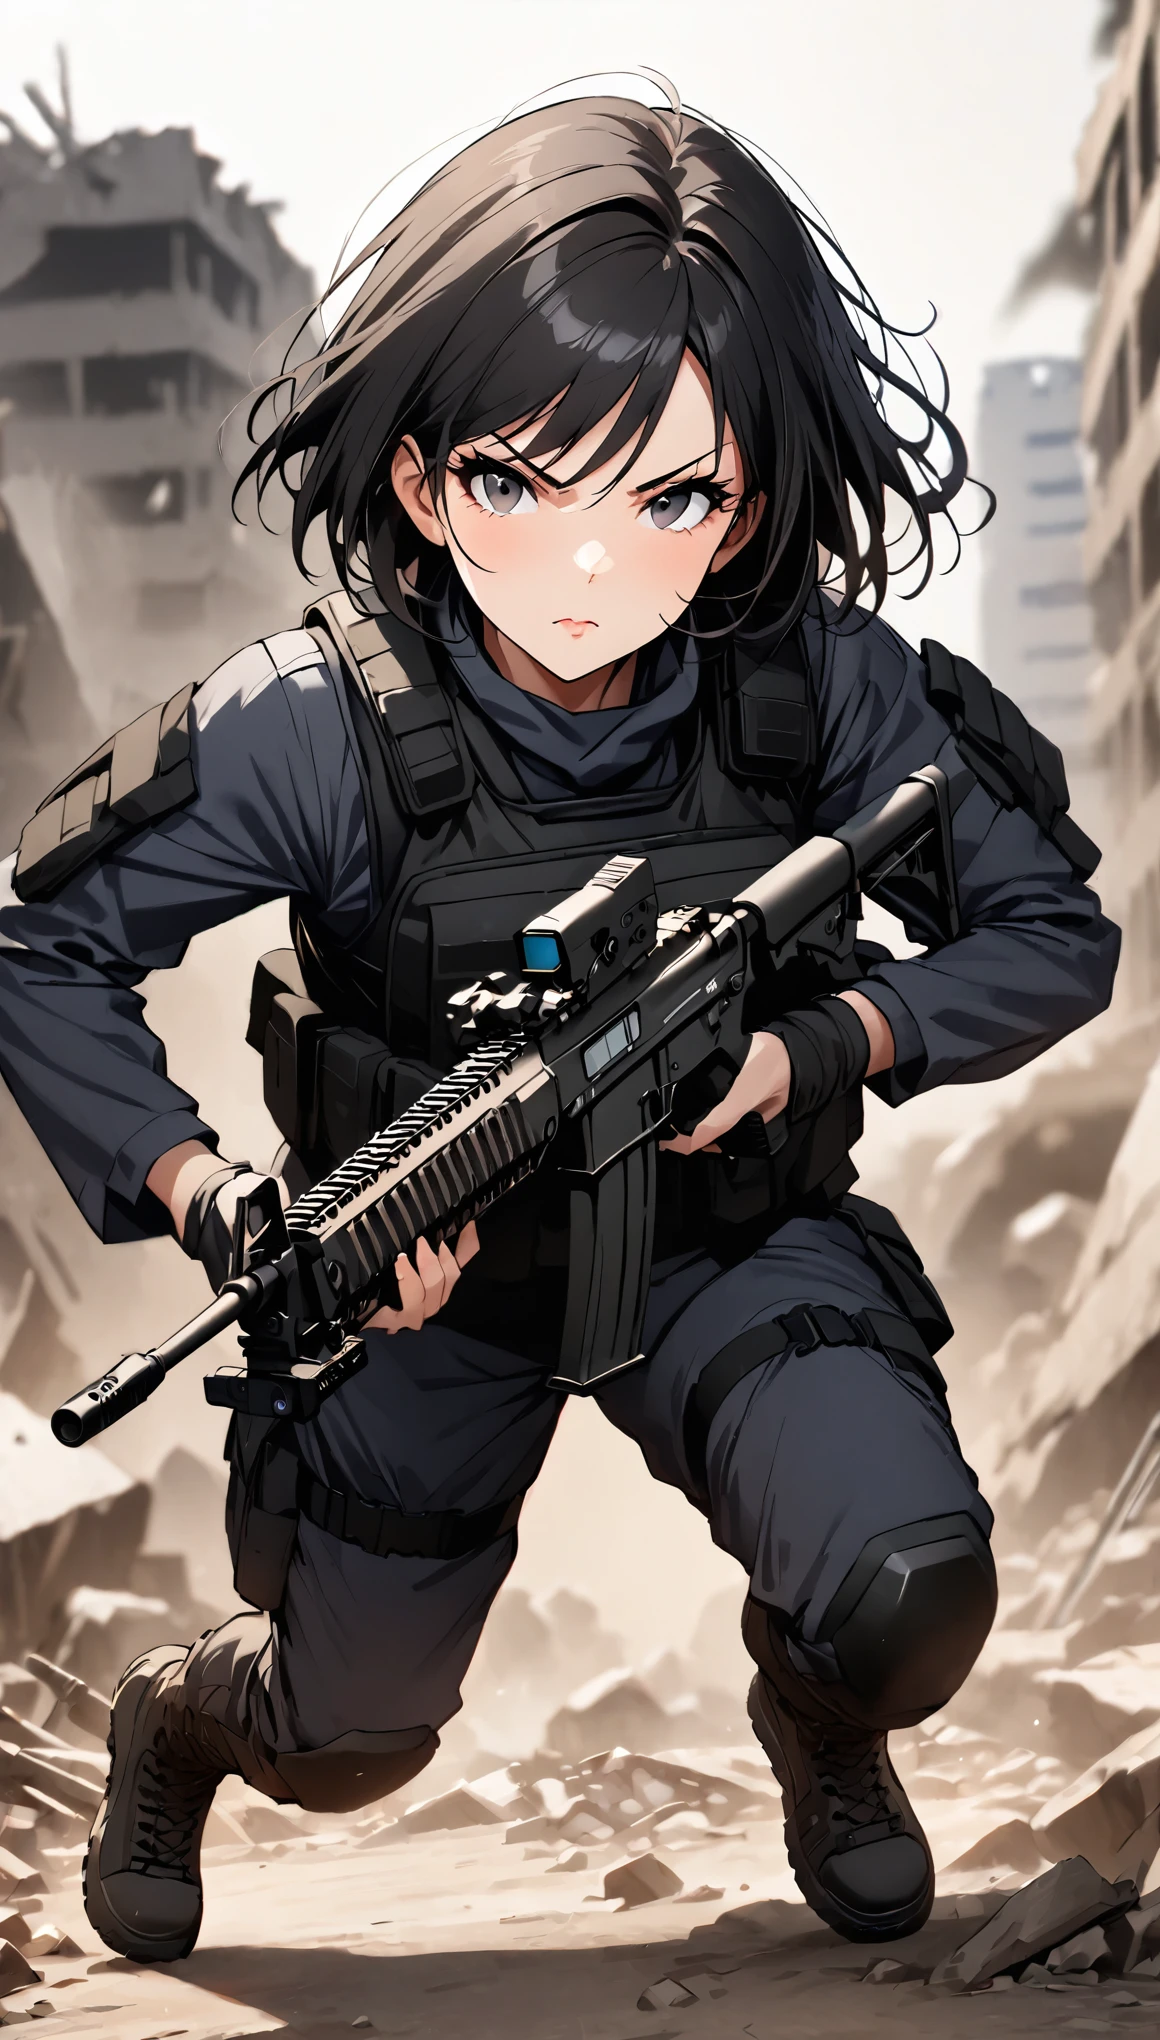 (masterpiece),(highest quality),(High resolution),(Very detailed),One woman,48 years old,Mature Woman,Japanese,Black Hair,Short Bob,Beautiful Eyes,Long eyelashes,Beautiful Hair,Beautiful Skin,Serious,BREAK(((Gunfight))),(Dynamic Movement),((submachine gun)),SWAT Uniforms,black bulletproof vest, Combat Boots, Black Tactical Forster,Tactical Headset,(The background is the rubble of ruins),(((Background Blur)))